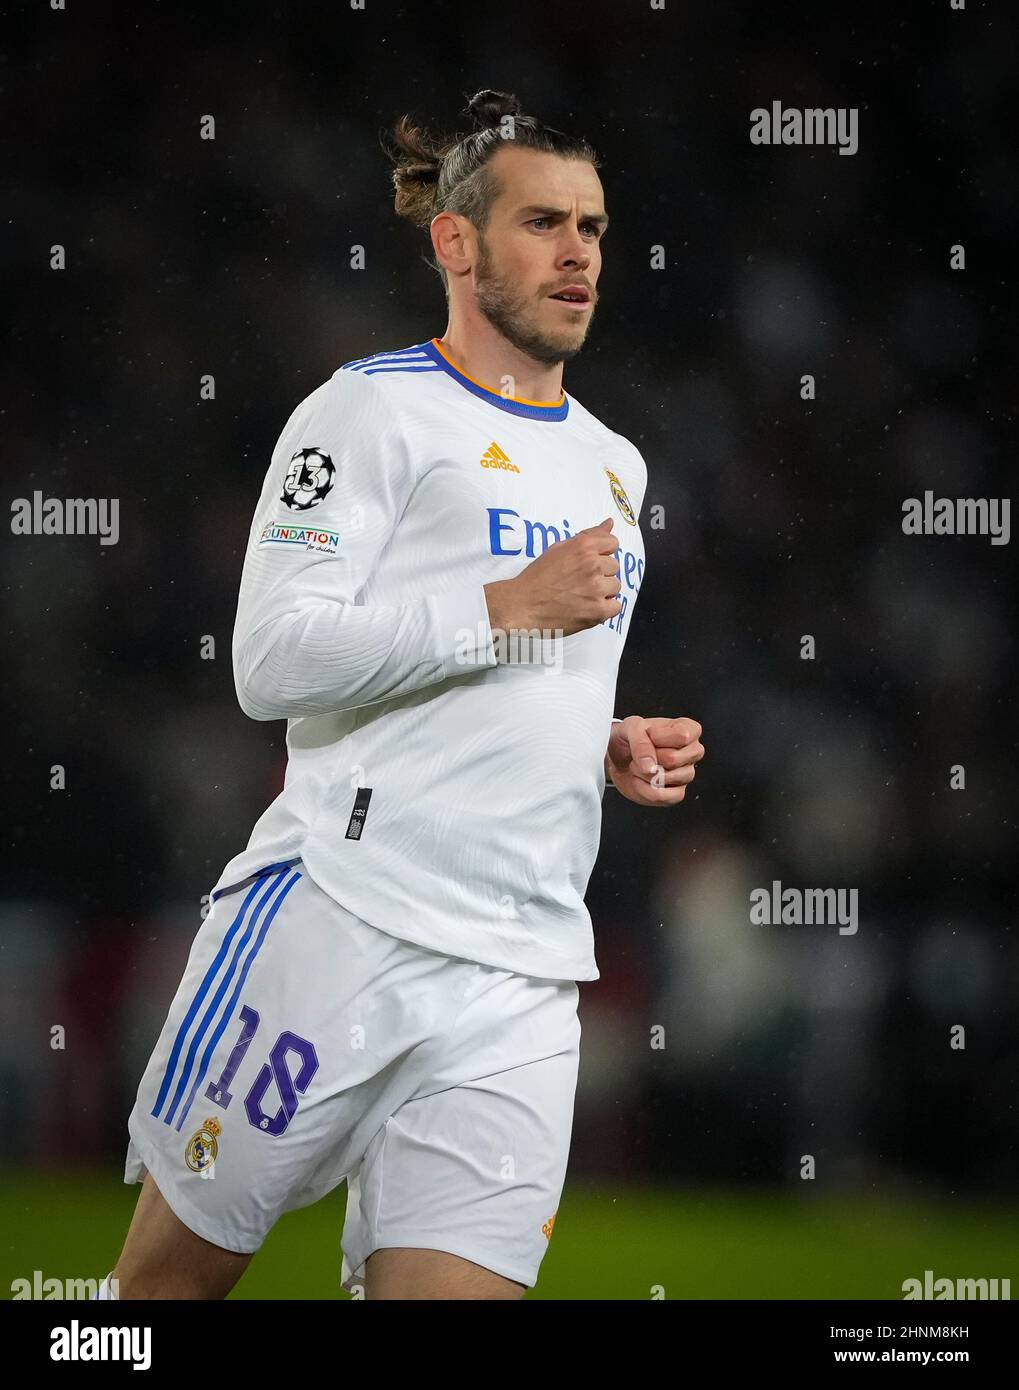 Derby, UK. 15th Feb, 2022. Gareth Bale of Real Madrid during the UEFA Champions  League round of 16 1st leg match between Paris Saint-Germain Feminines and  Real Madrid at Le Parc des